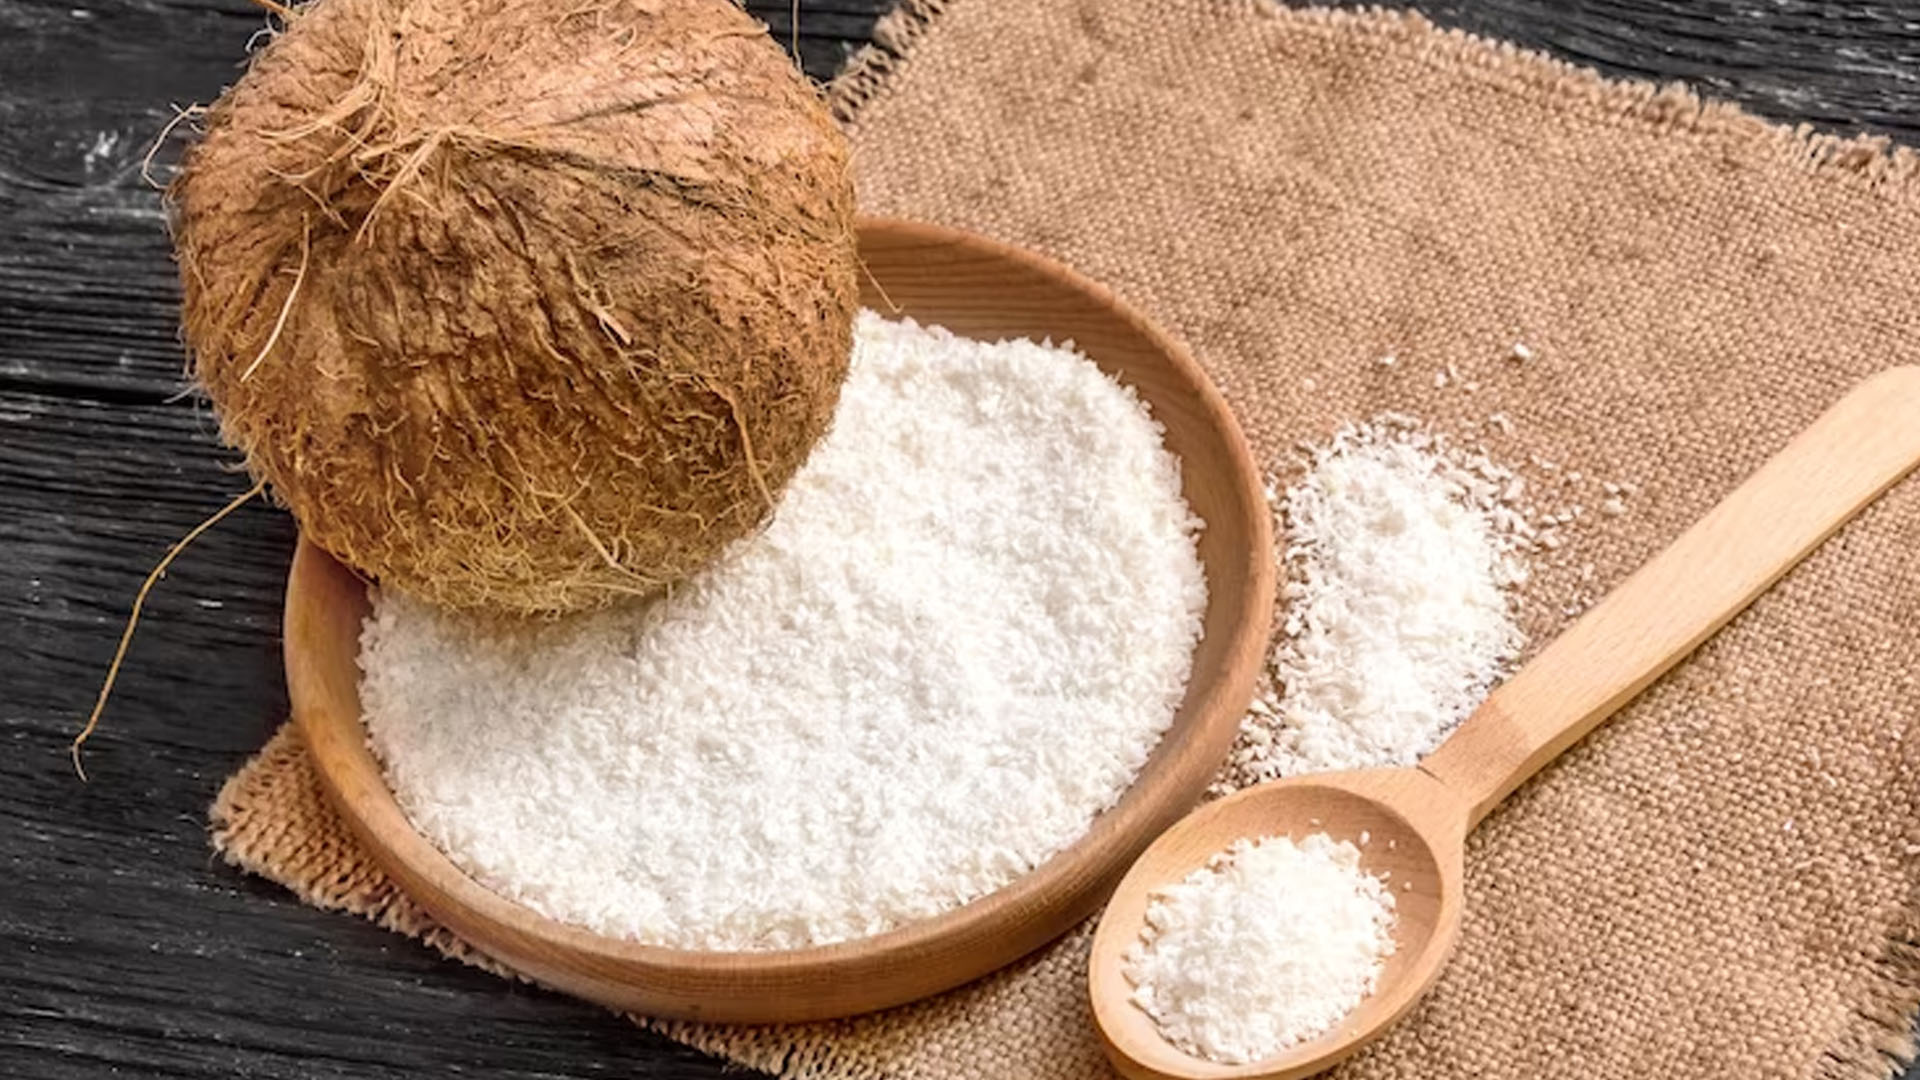 Does Coconut Palm Sugar Have Health Benefits?